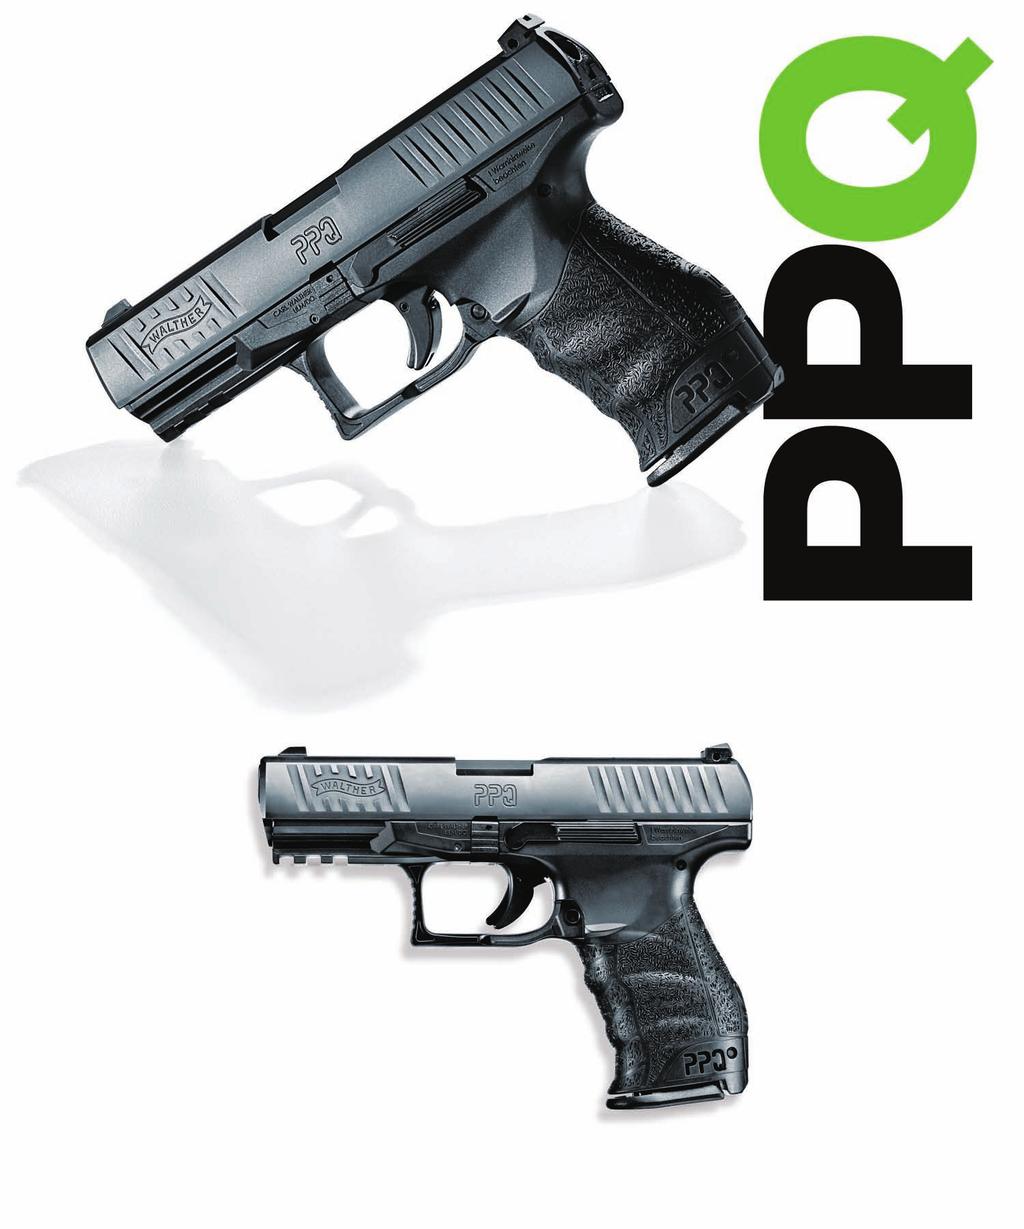 The PPQ puts a fast, more confident response into the palm of your hand with cutting-edge features like the new Walther Quick Defense Trigger.